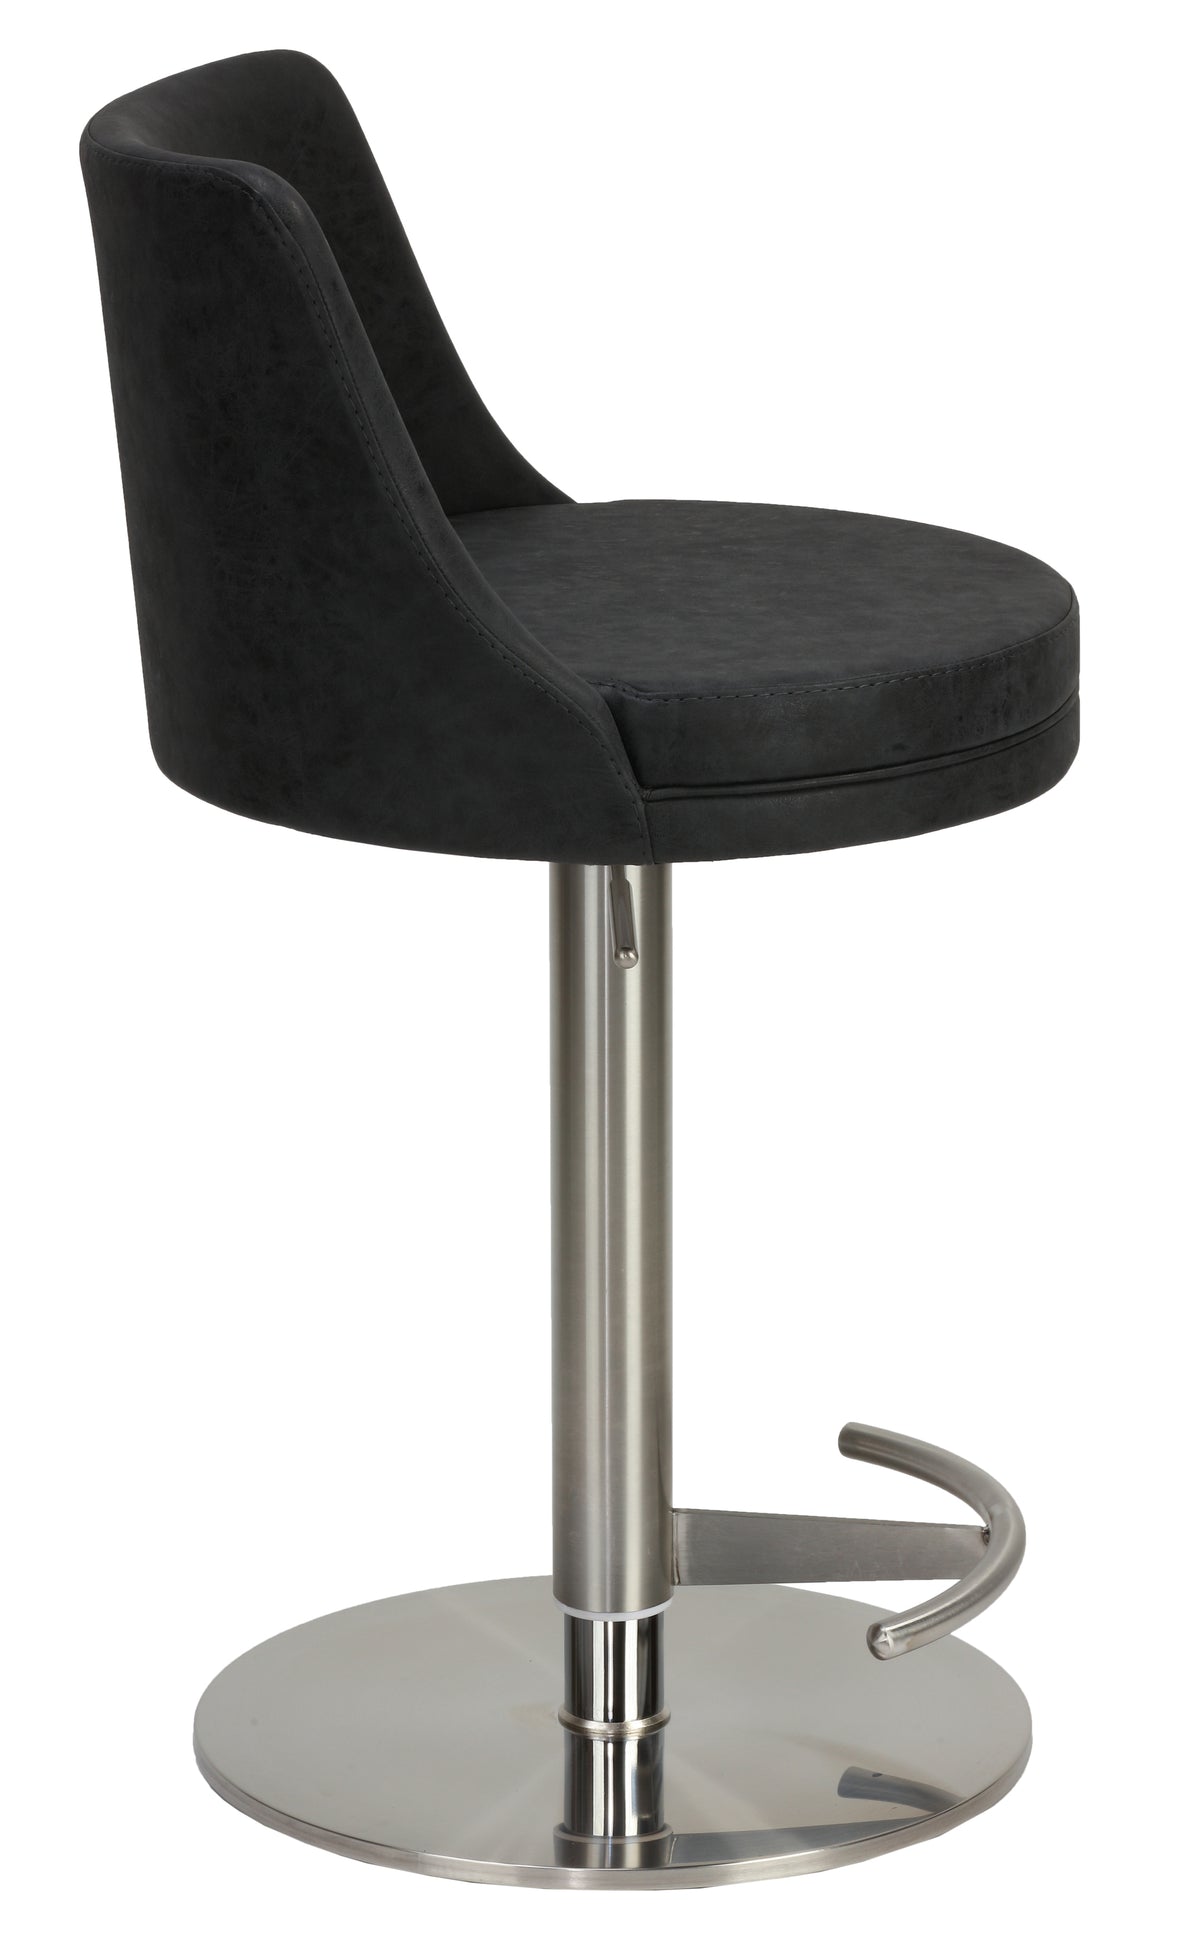 Cortesi Home Eros Adjustable Barstool in Brushed Stainless Steel with Heavy Solid Base, Retro Black